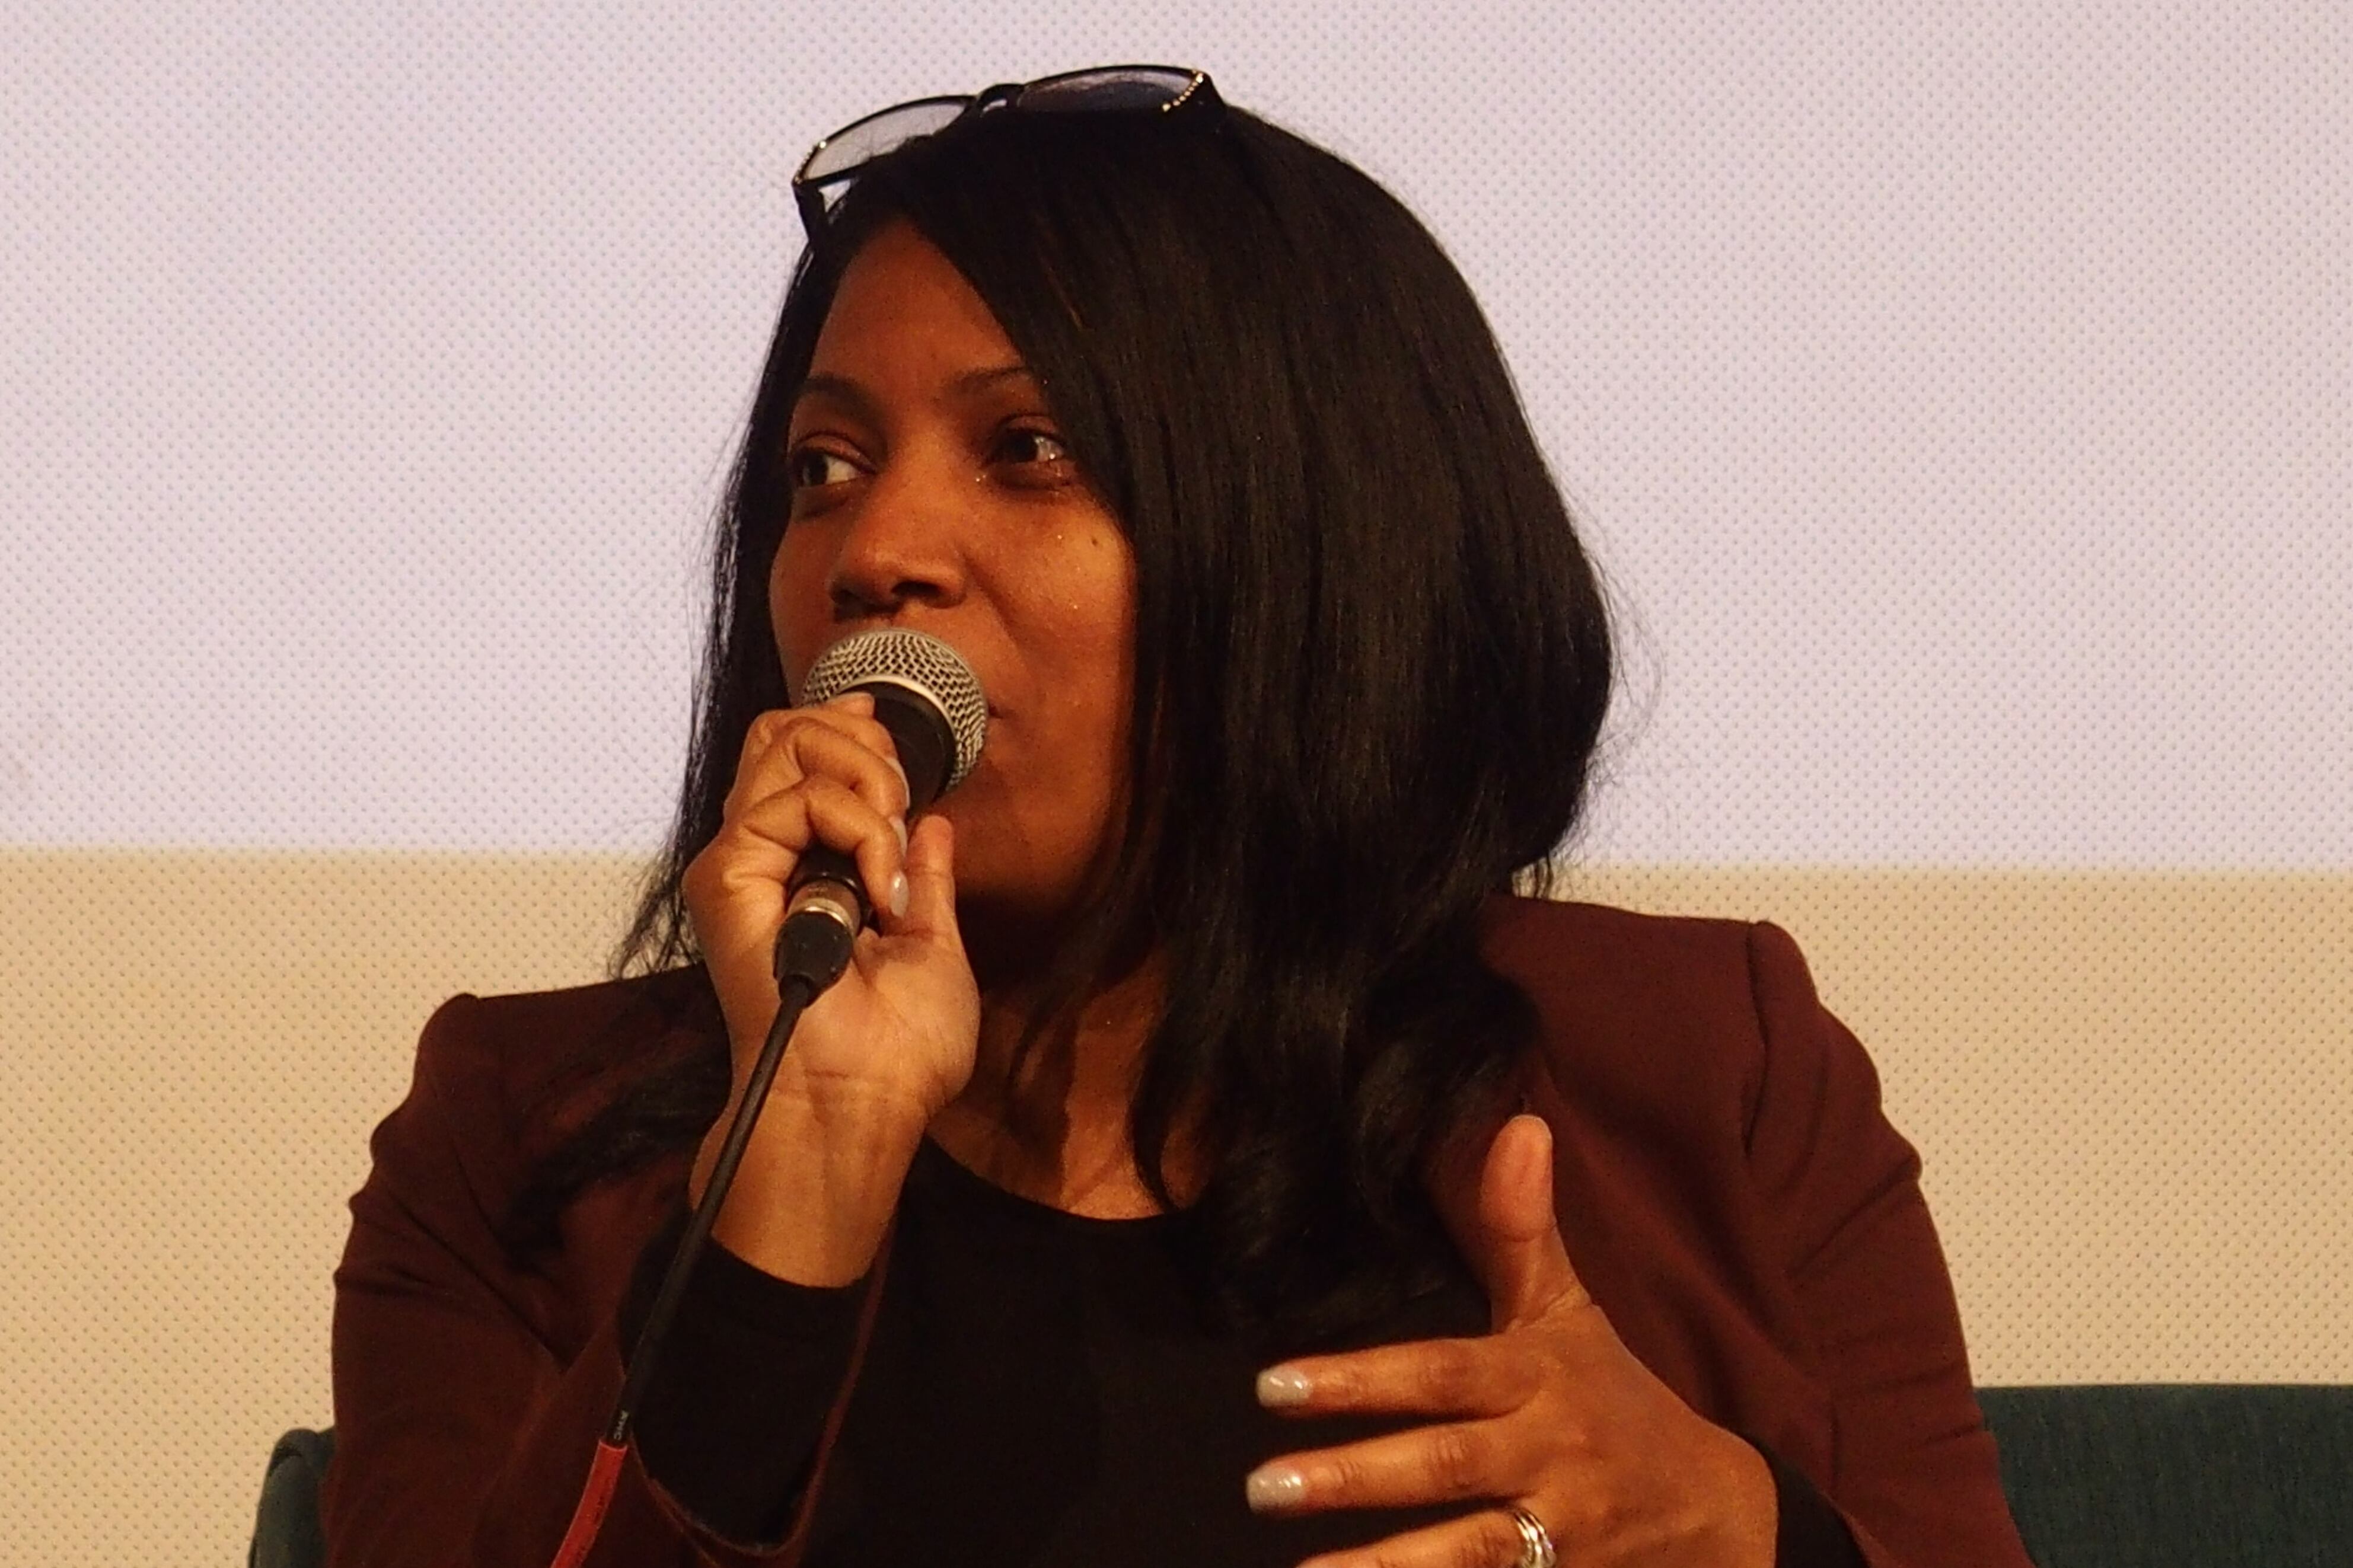 A woman with long dark hair and sunglasses on her head speaks into a microphone. She is wearing black clothes.